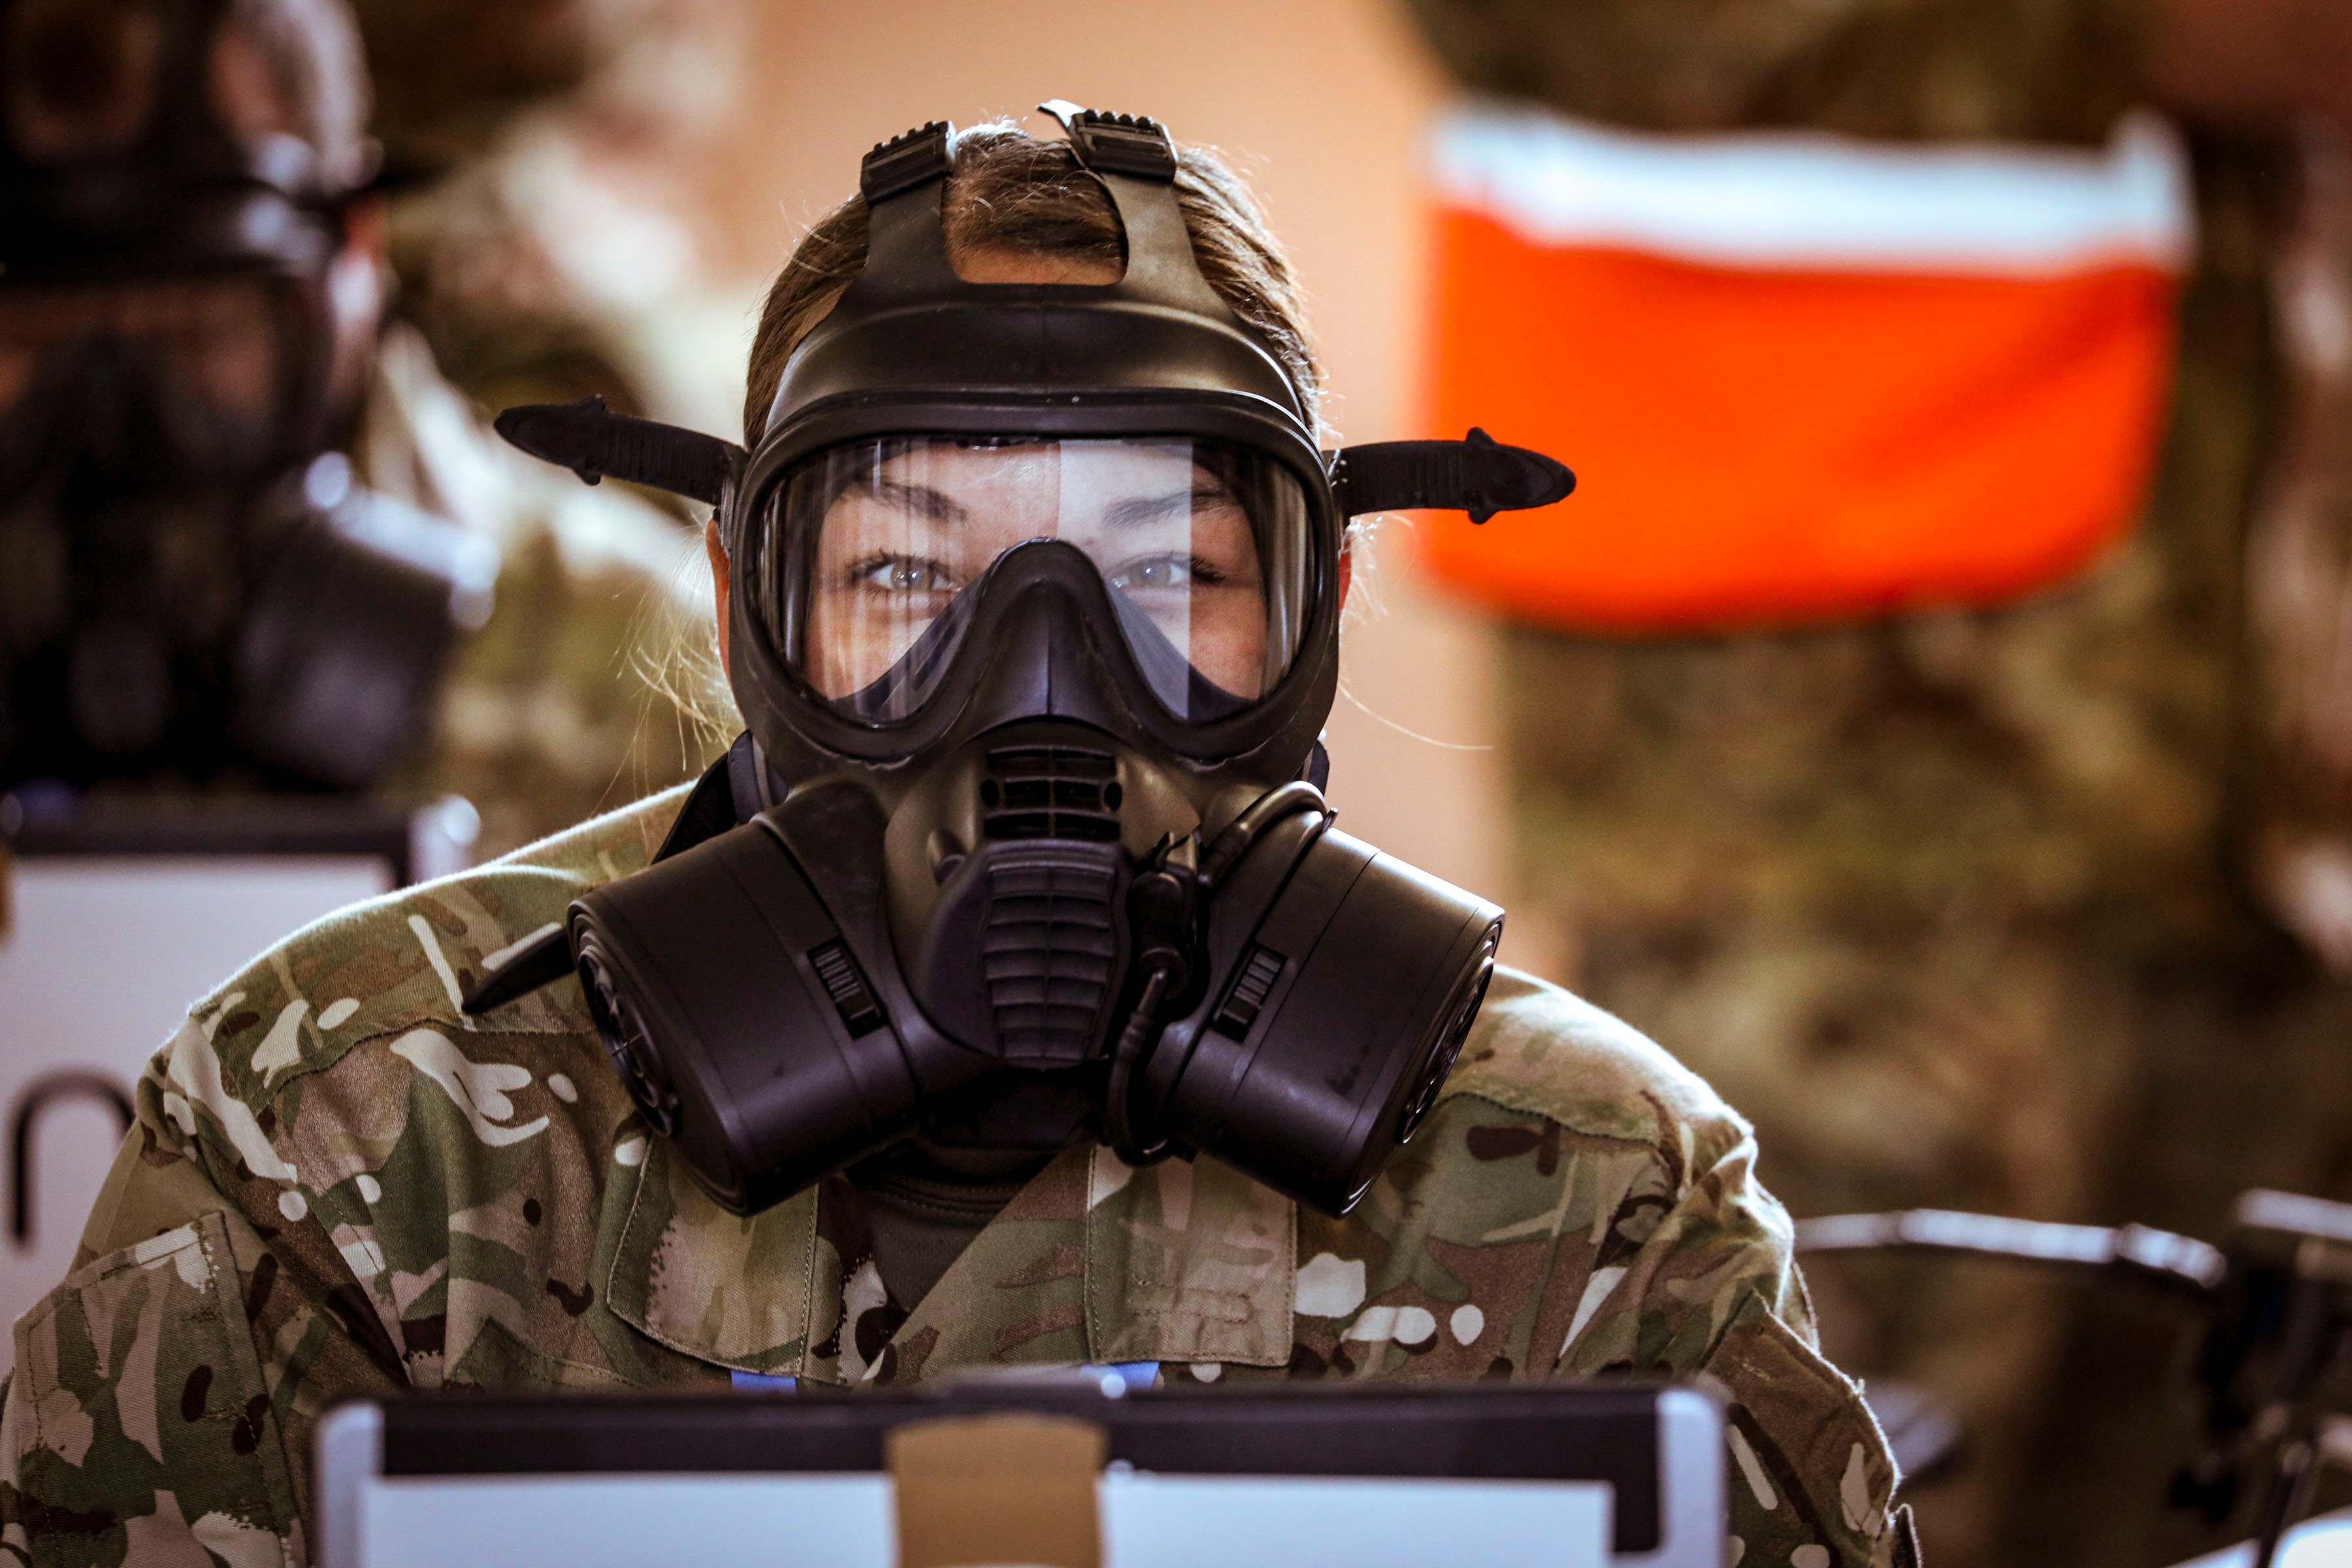 Image shows RAF aviator wearing a respiratory gas mask at a table..